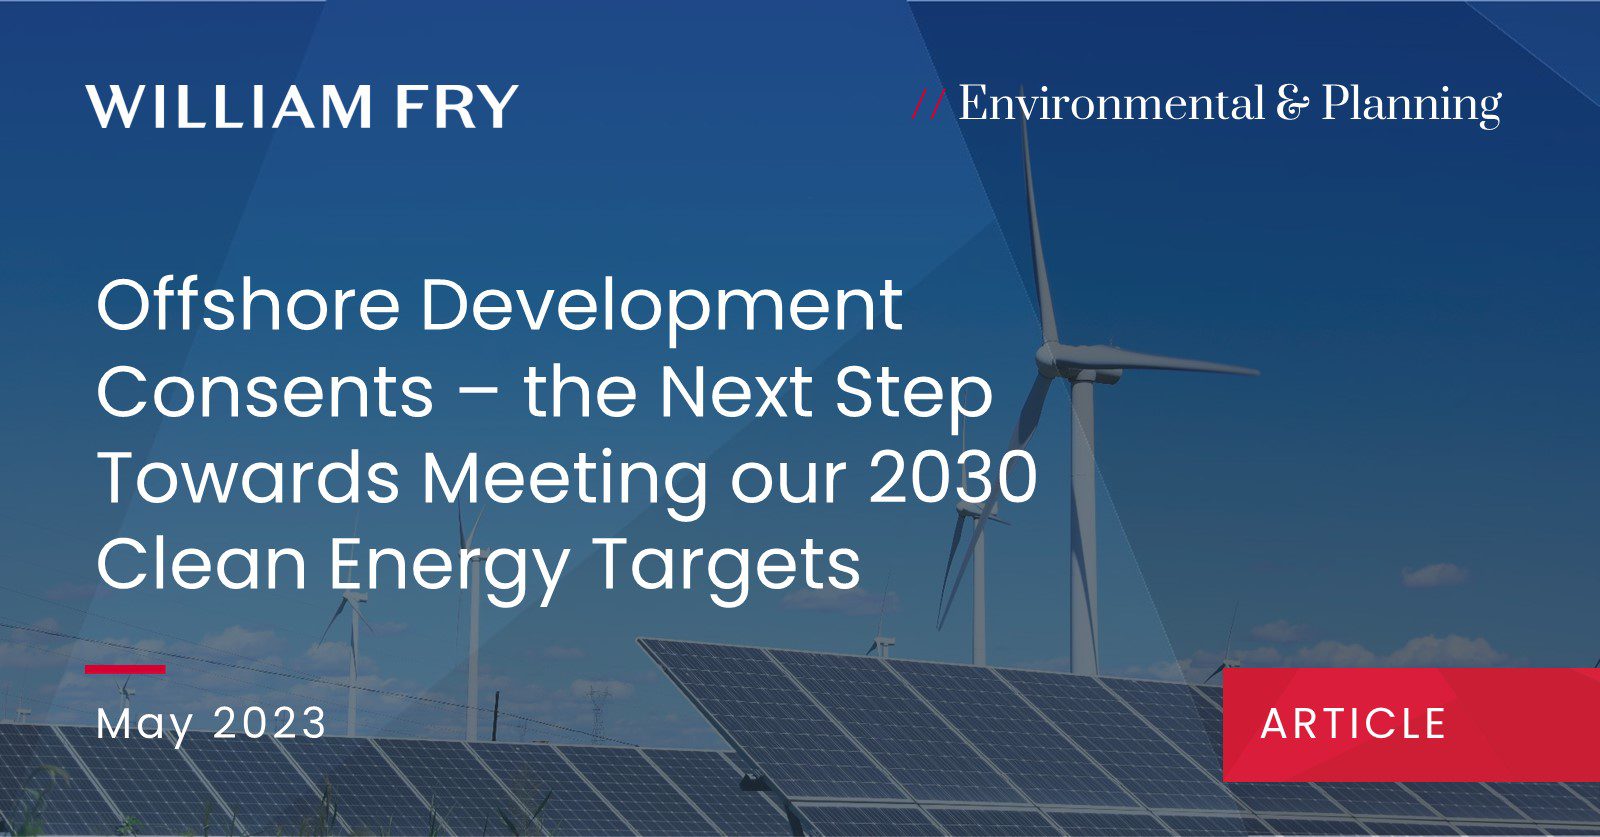 Offshore Development Consents – the Next Step Towards Meeting our 2030 Clean Energy Targets